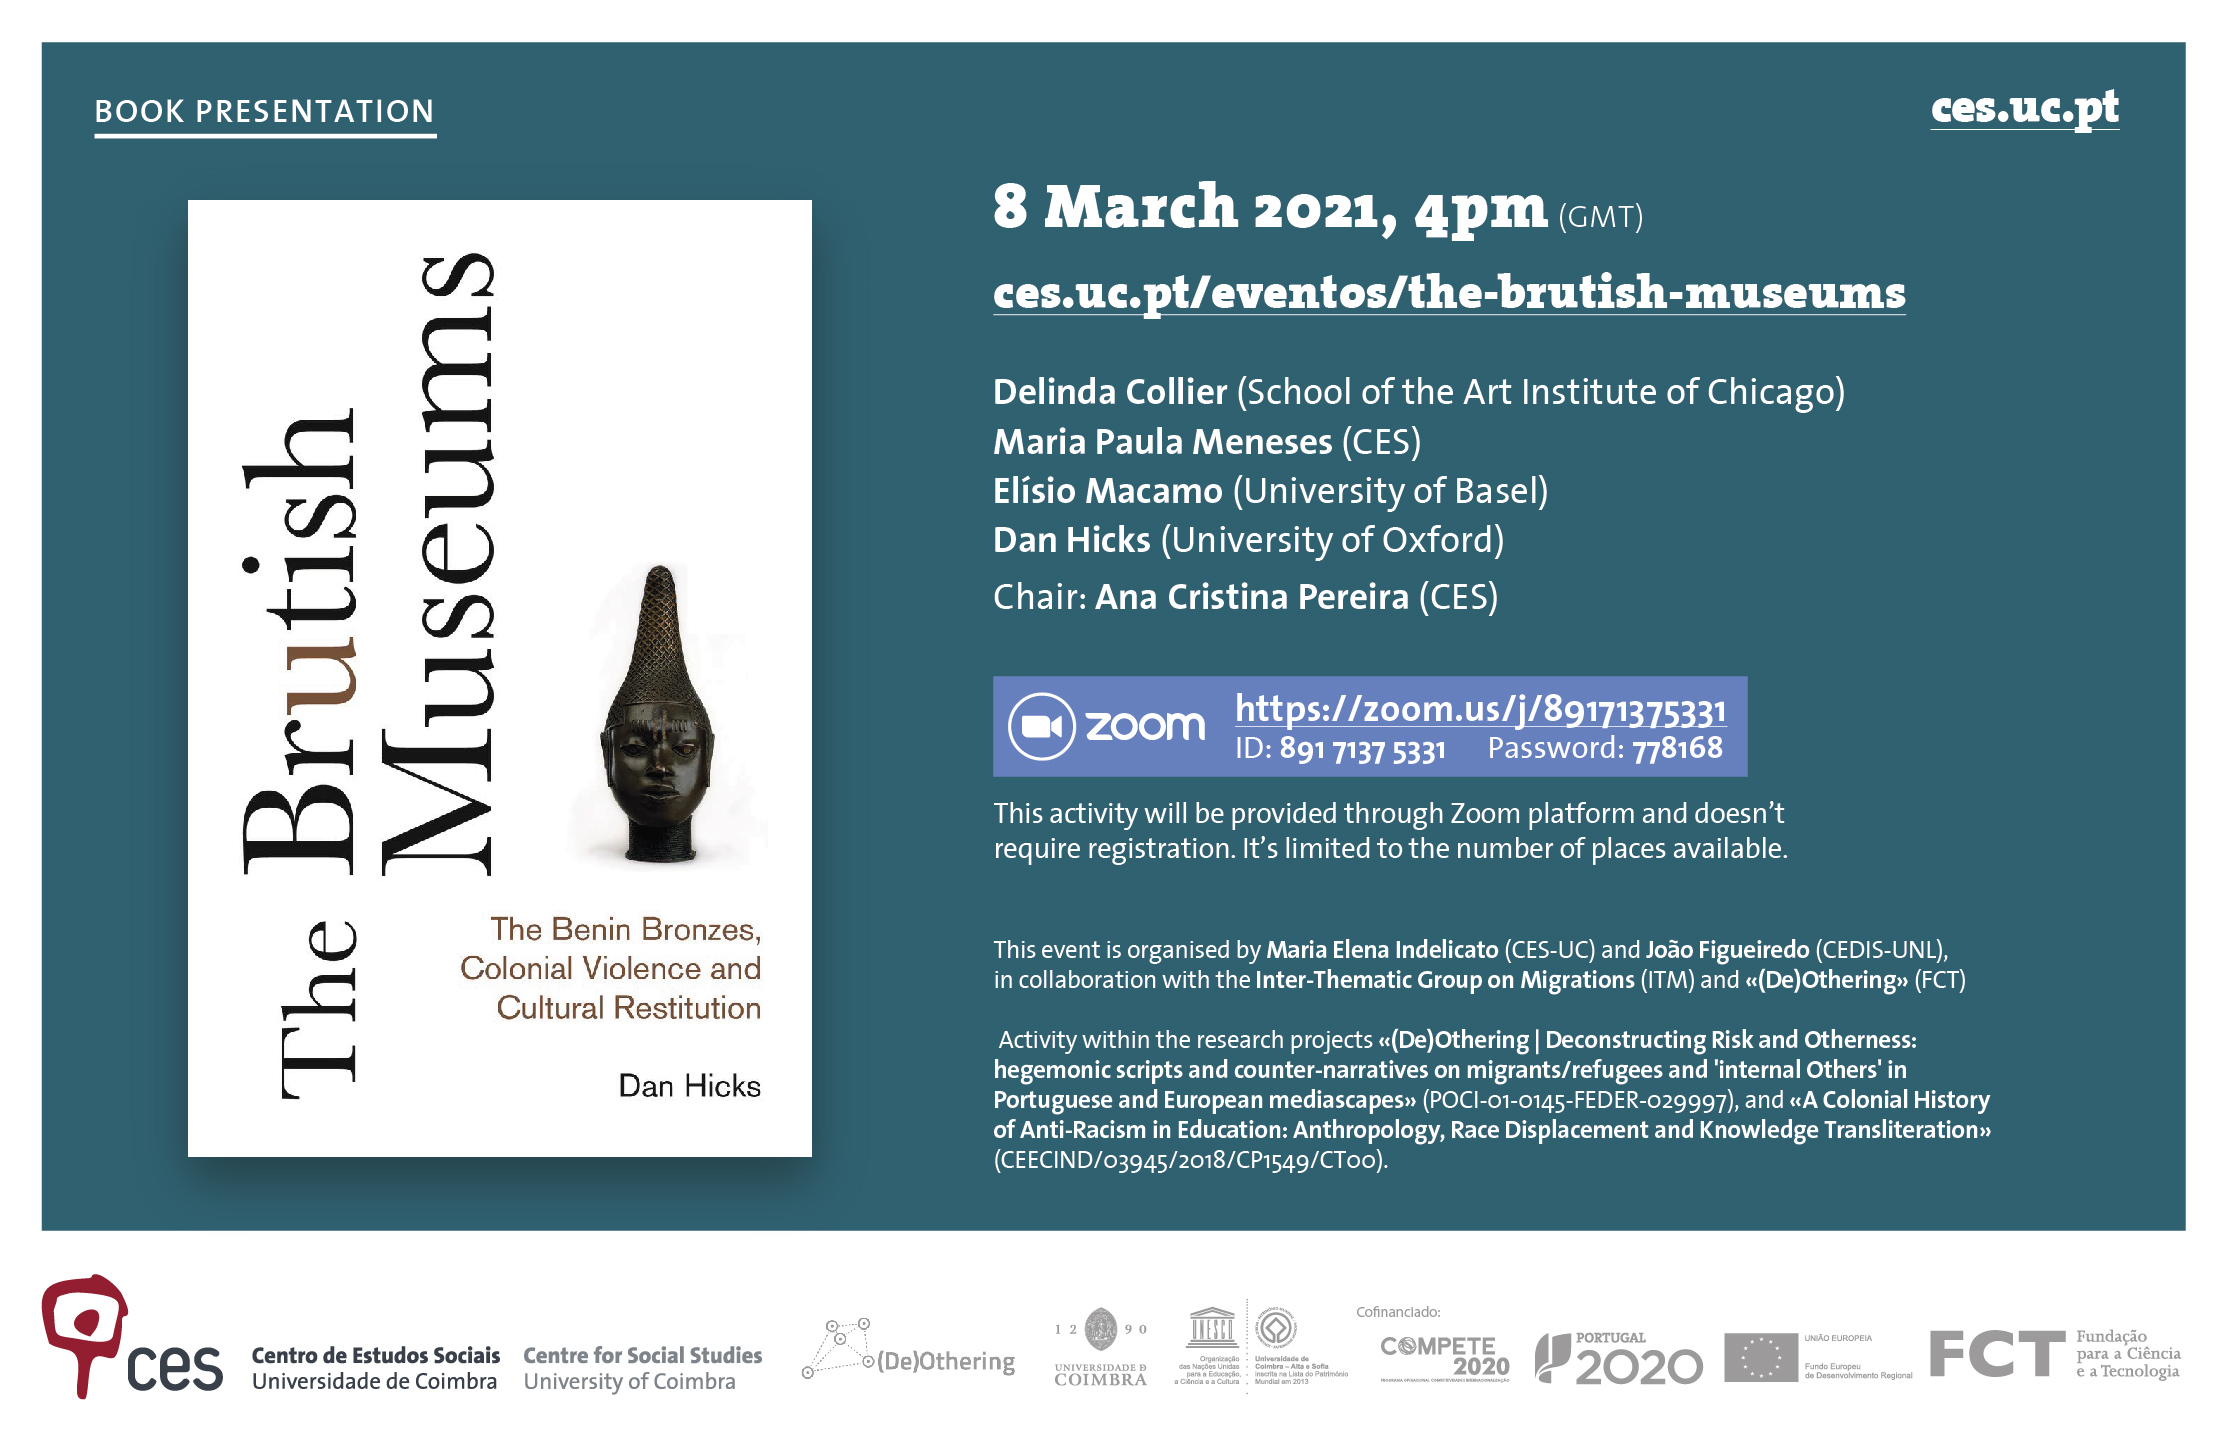 «The Brutish Museums: The Benin Bronzes, Colonial Violence and Cultural Restitution» by Dan Hicks<span id="edit_32608"><script>$(function() { $('#edit_32608').load( "/myces/user/editobj.php?tipo=evento&id=32608" ); });</script></span>